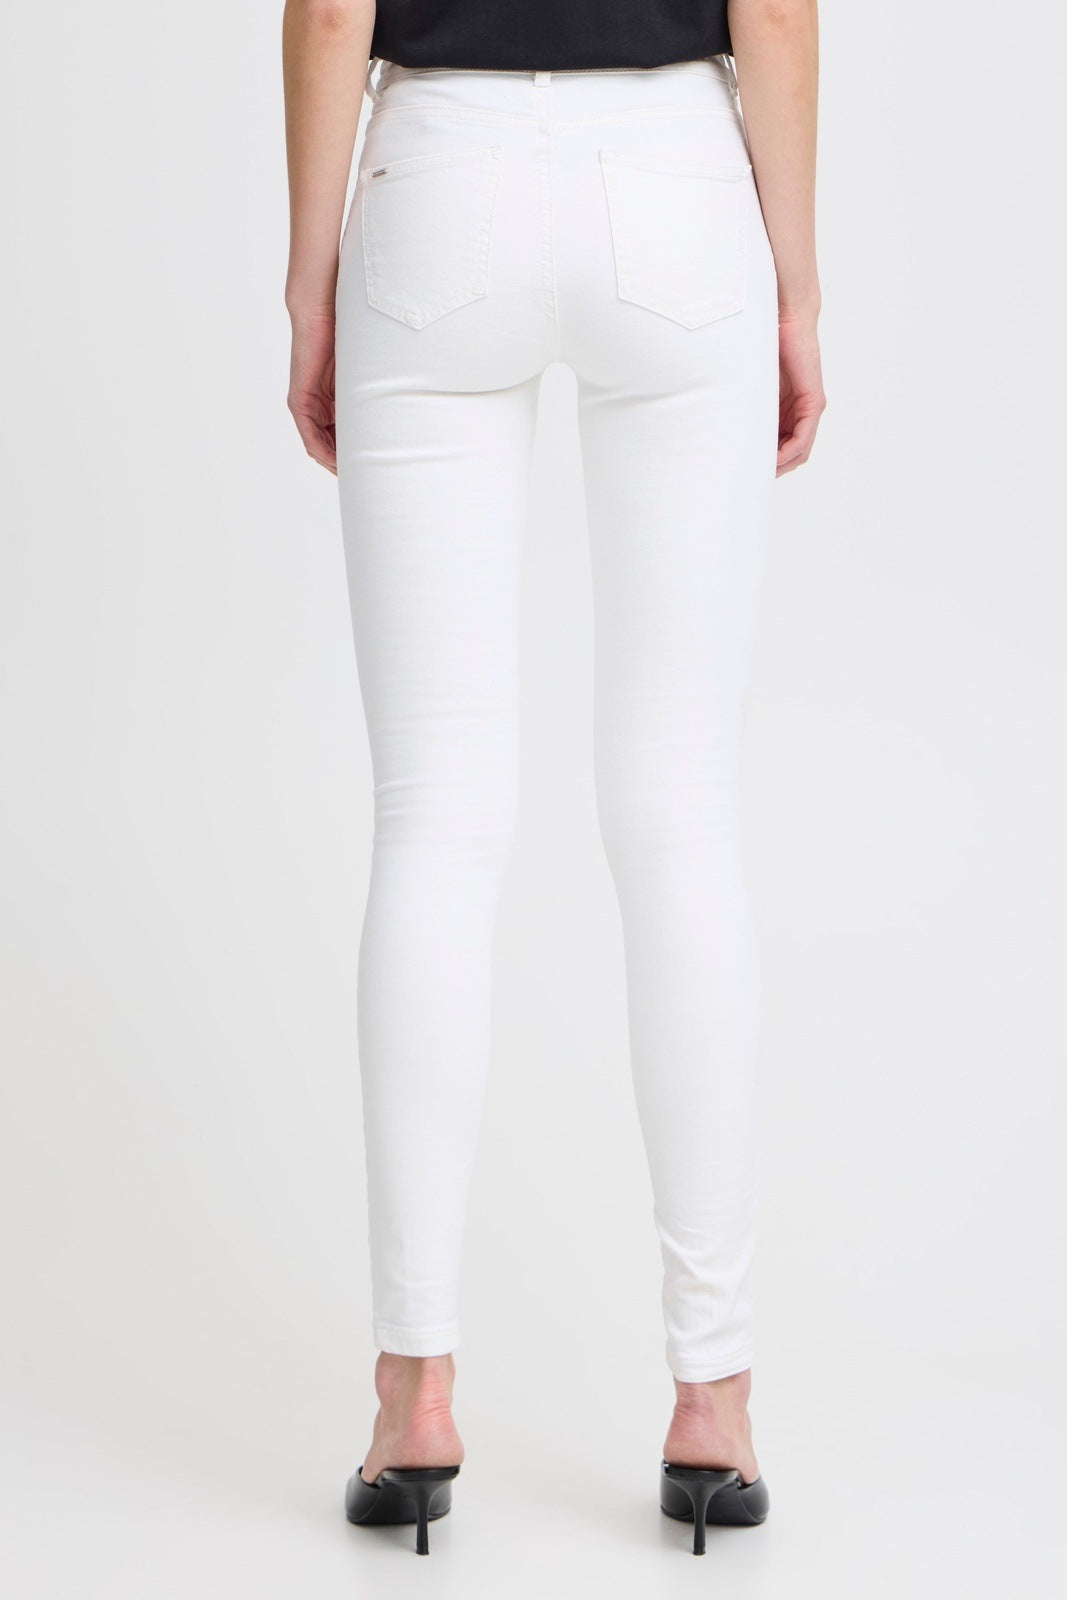 B.young Denim Jeans - White 4 Shaws Department Stores